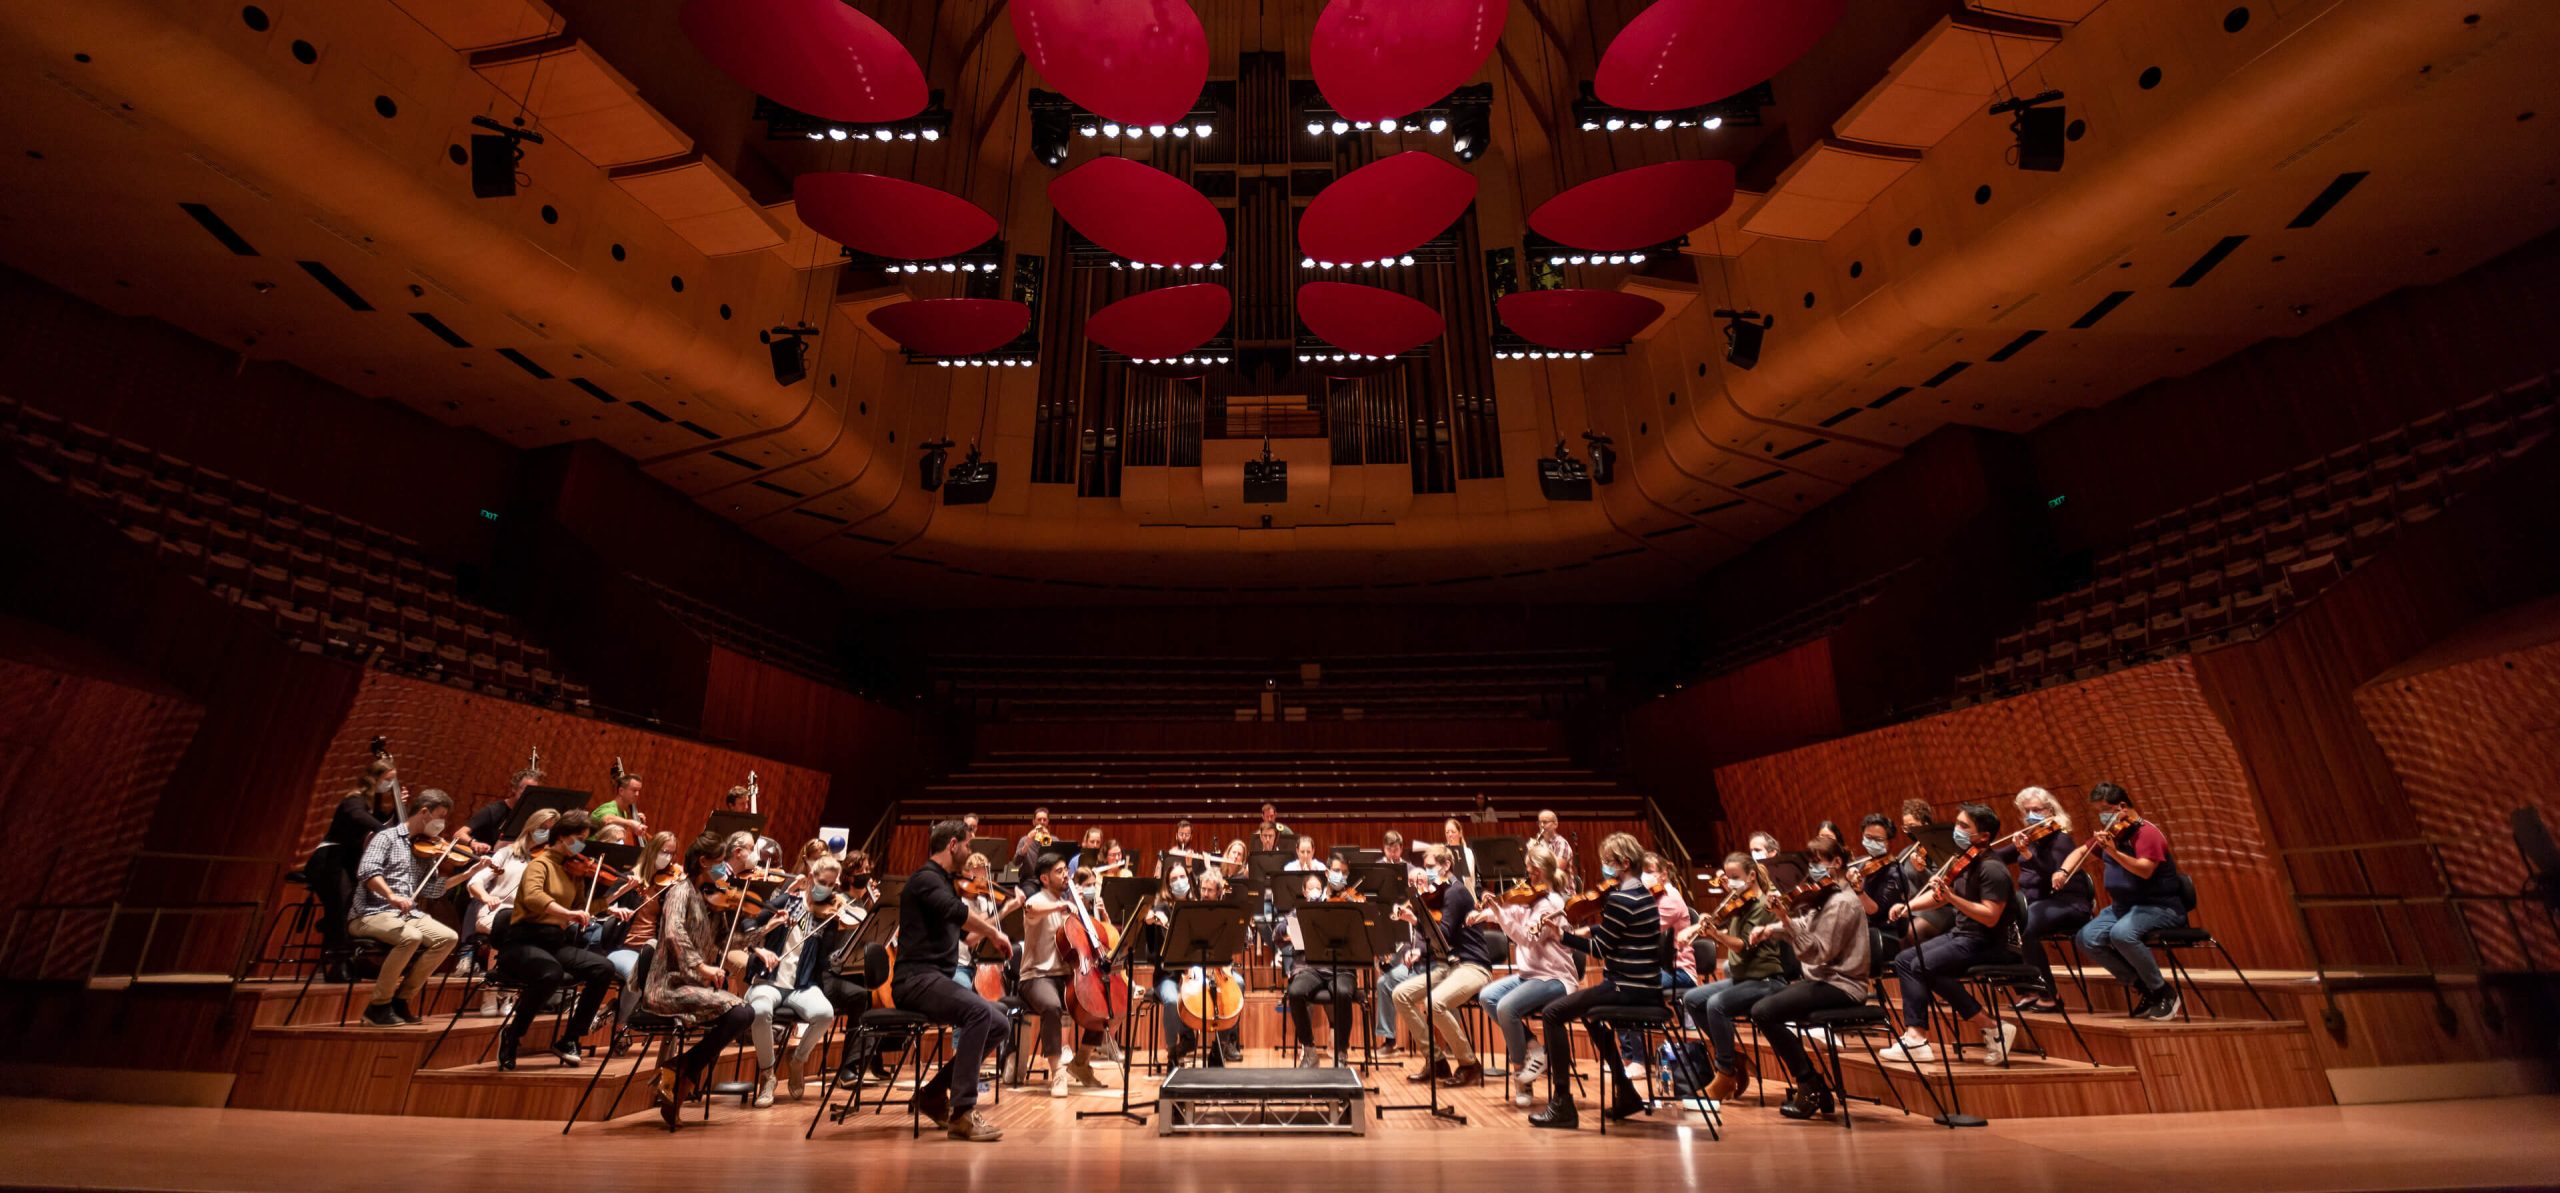 11 stage at sydney opera house taylor construction refurbishment and live environments